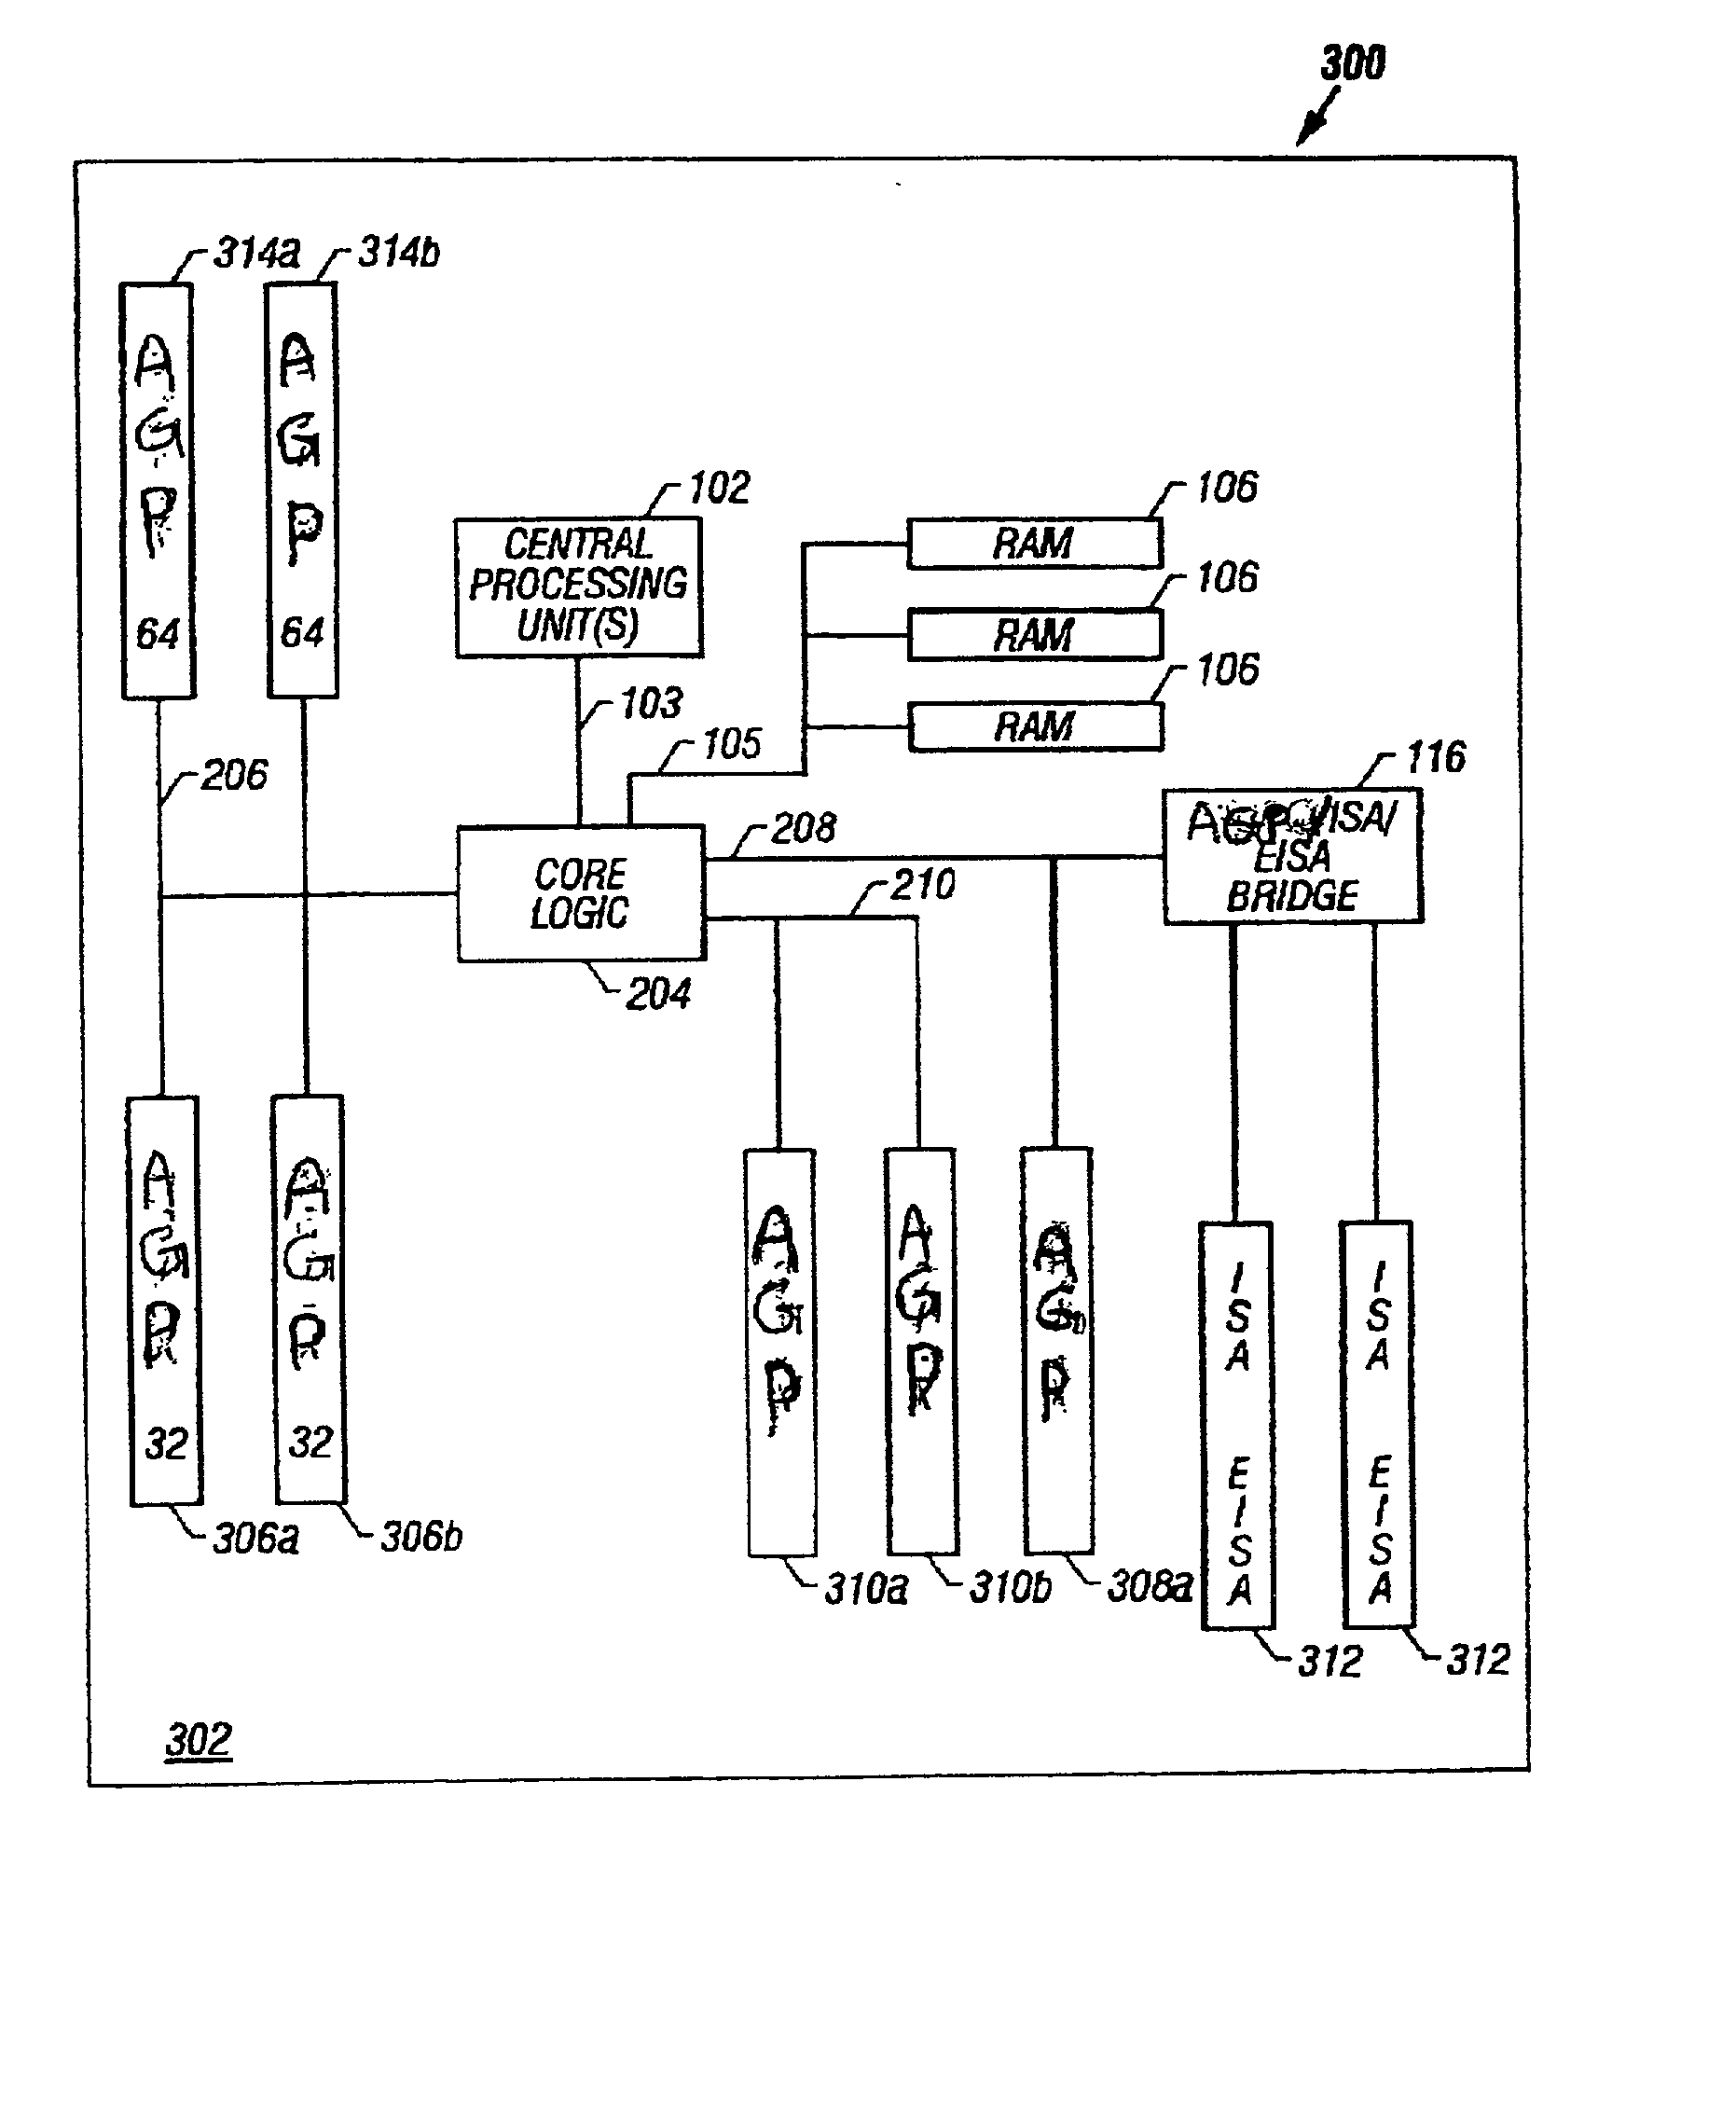 Computer CPU and memory to accelerated graphics port bridge having a plurality of physical buses with a single logical bus number